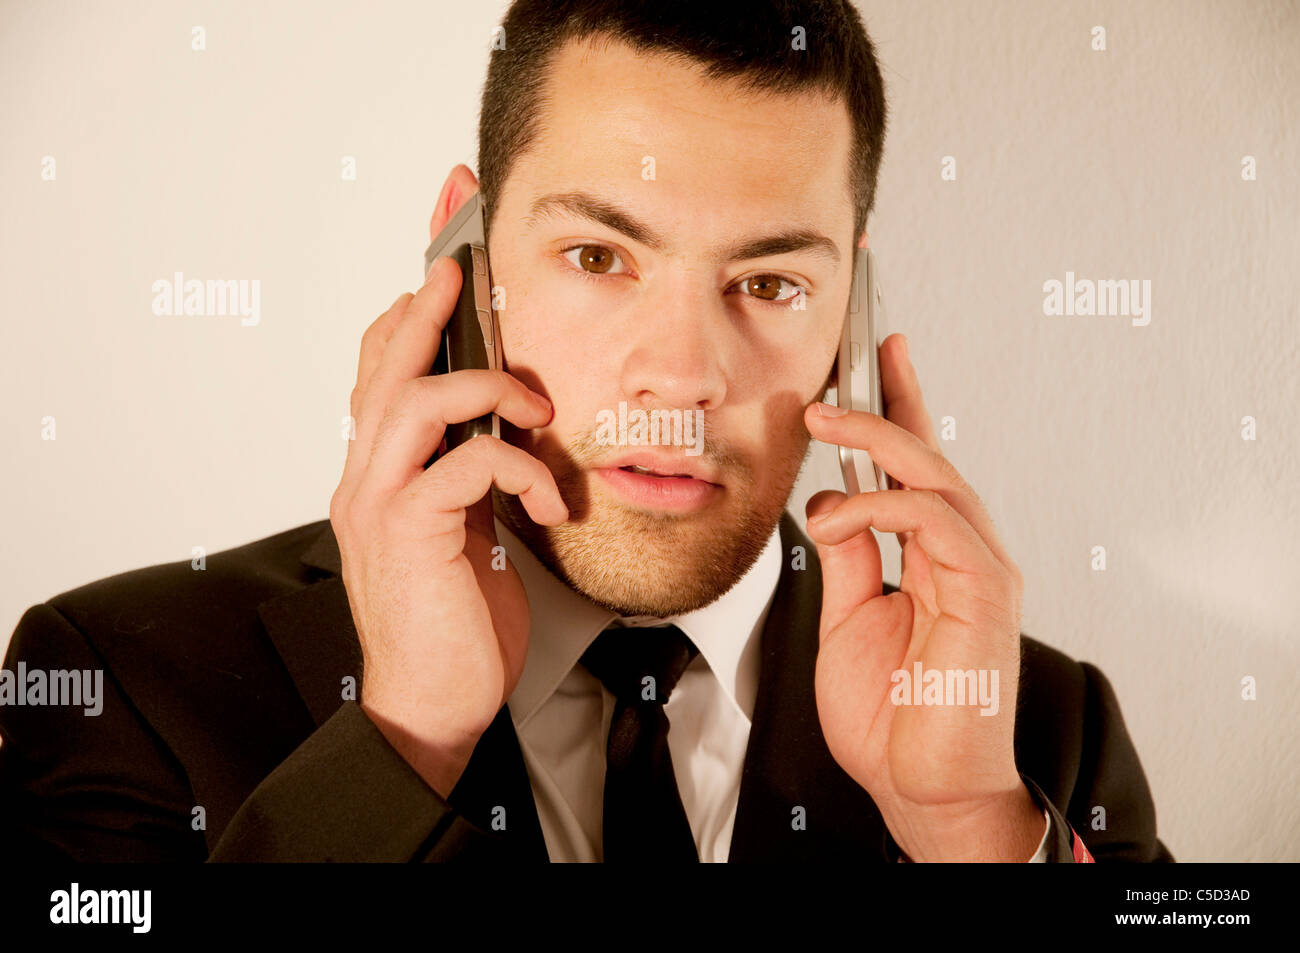 Young man using two mobiles phones. Stock Photo